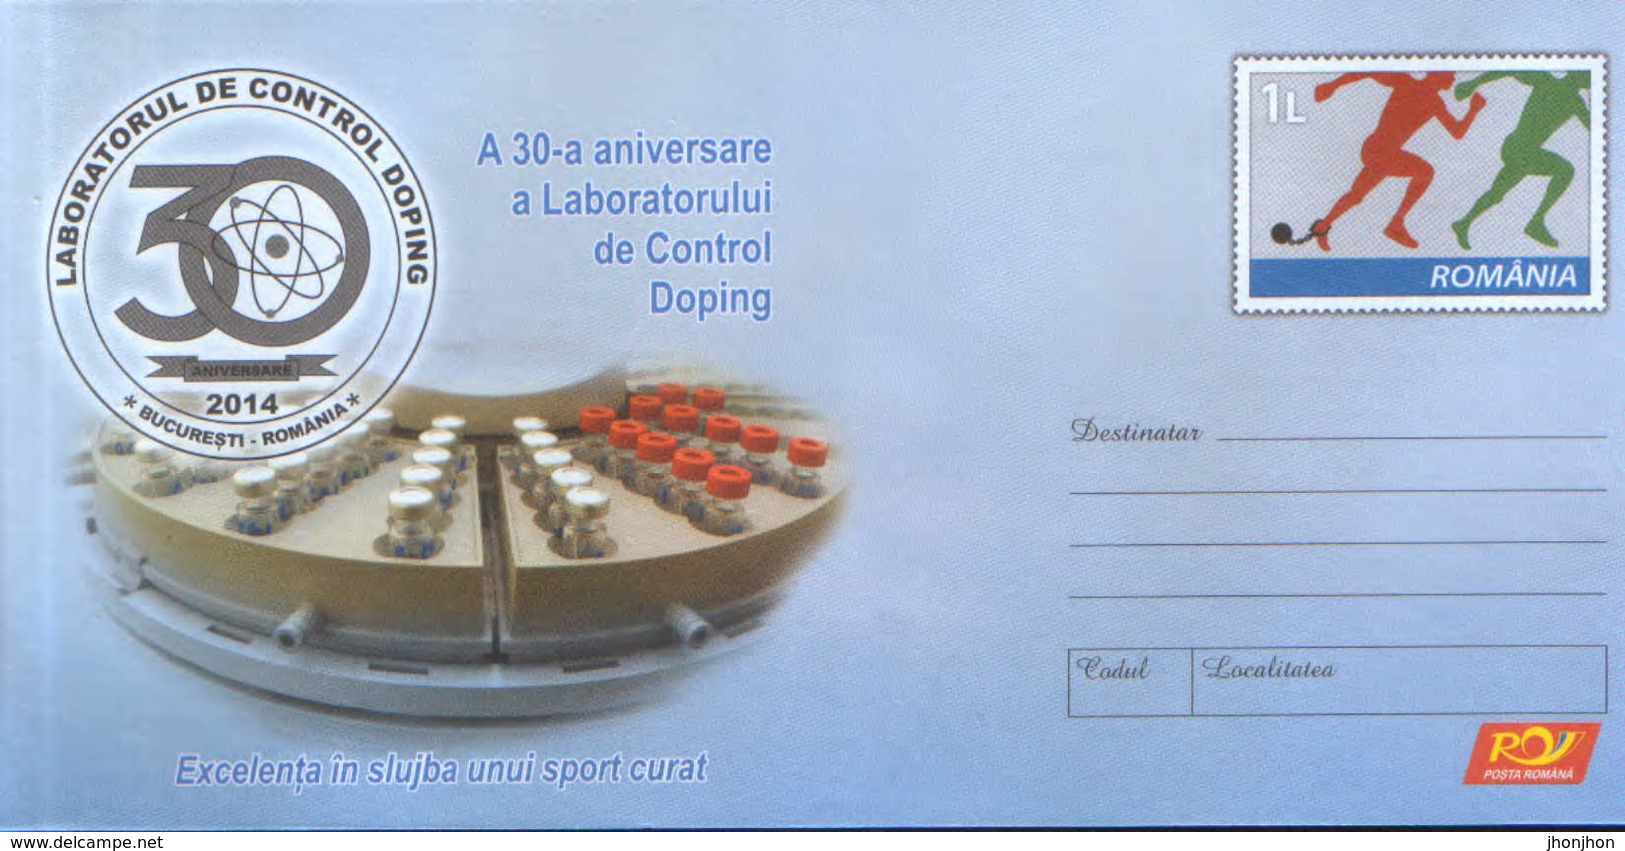 Romania - Stationery Cover Unused 2014(009) - The 30th Anniversary Of The Control Laboratory, Doping - Droga